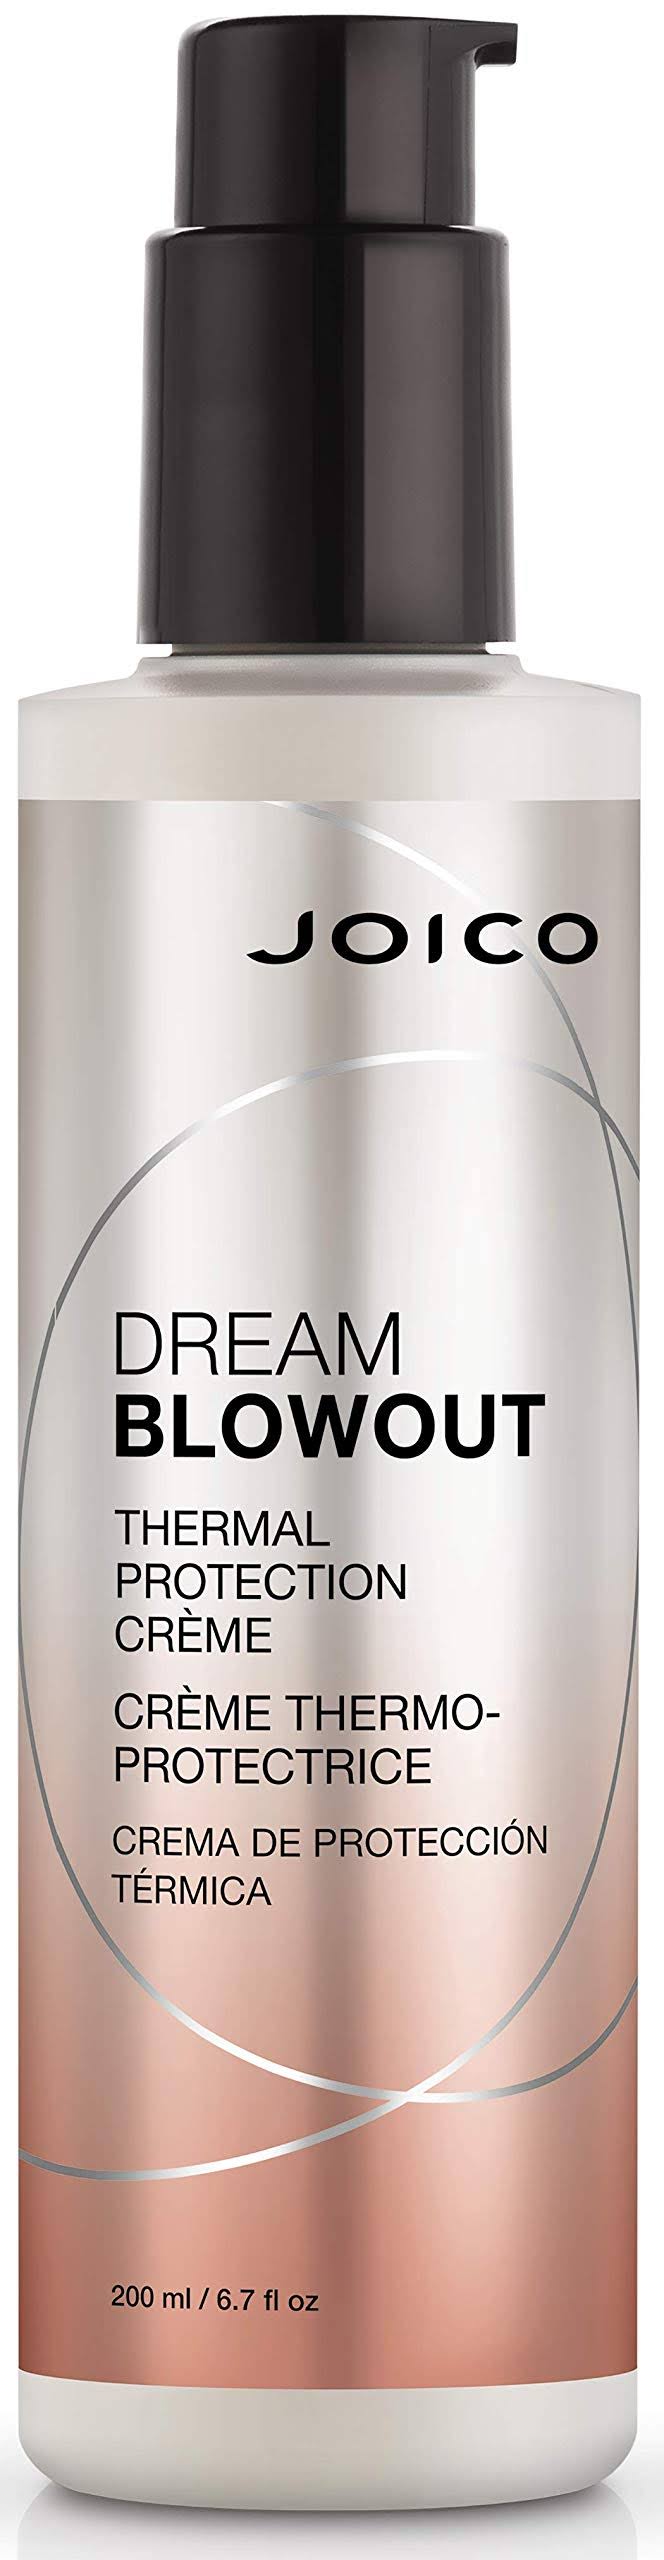 Joico - Dream Blowout Thermal Protection Creme 200 ml